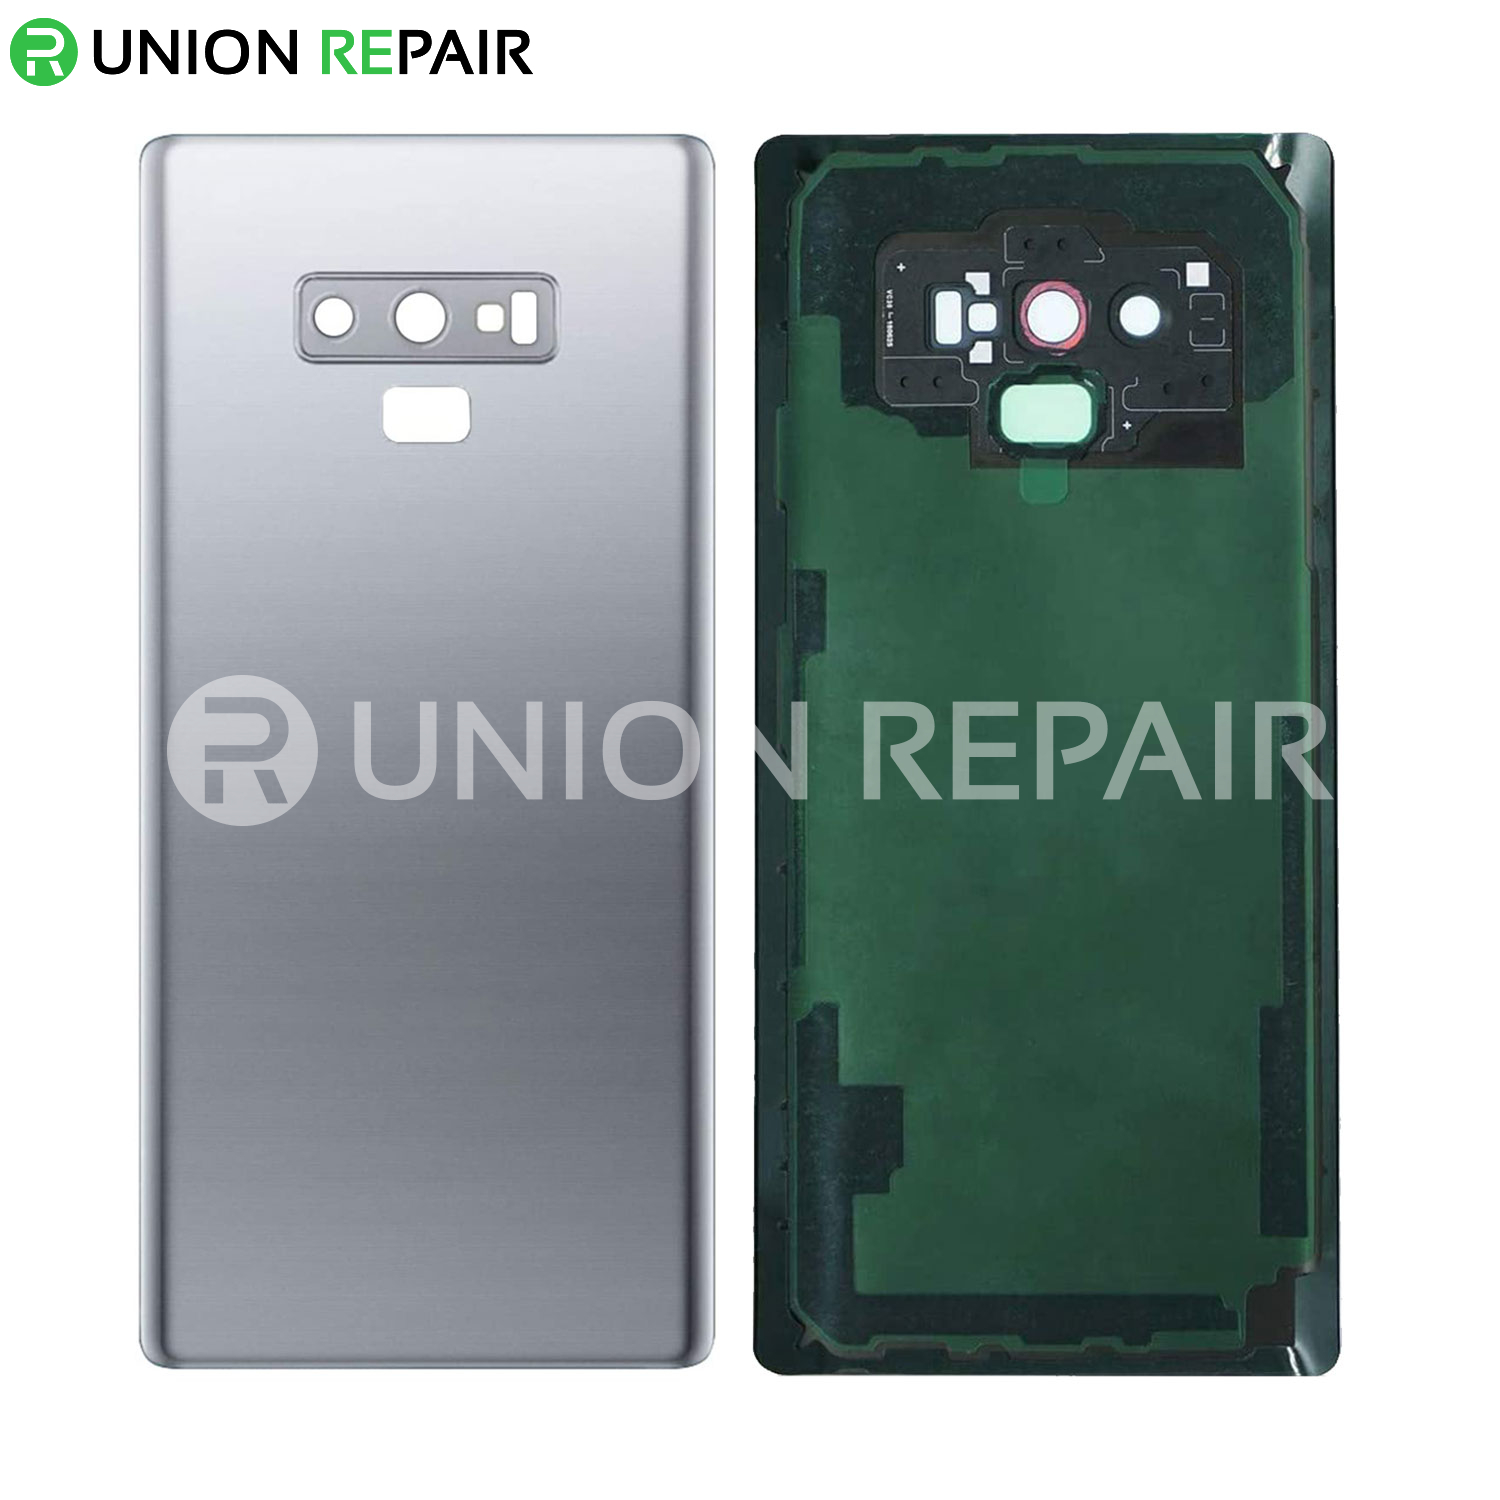 Replacement for Samsung Galaxy Note 9 SM-N960 Back Cover - Cloud Silver